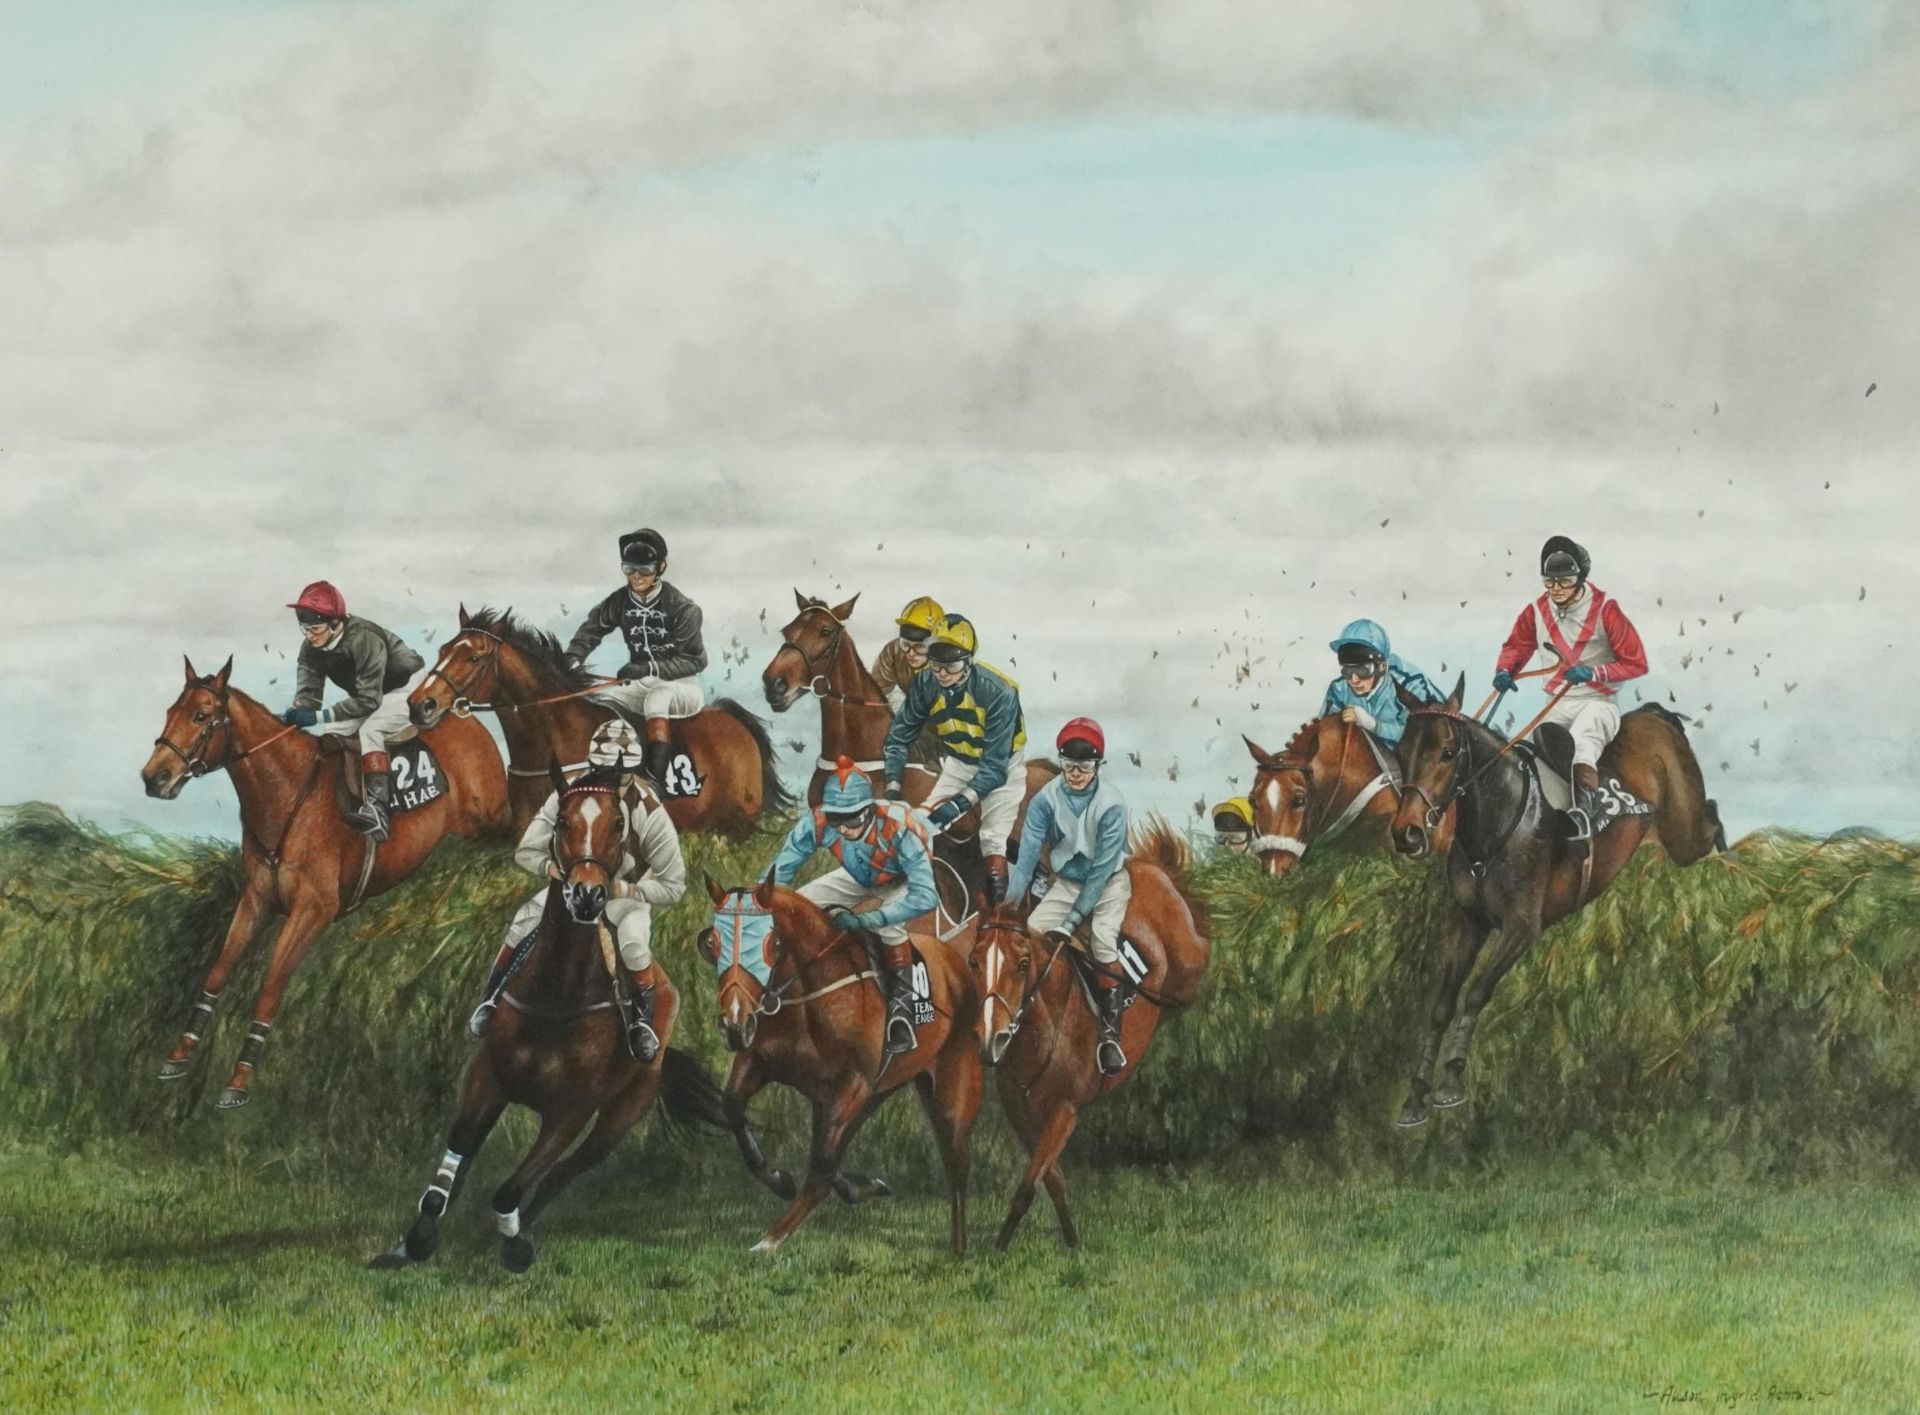 Alison Ingrid Ashton - The Grand National, Aintree 1990, equestrian interest watercolour, Cancer